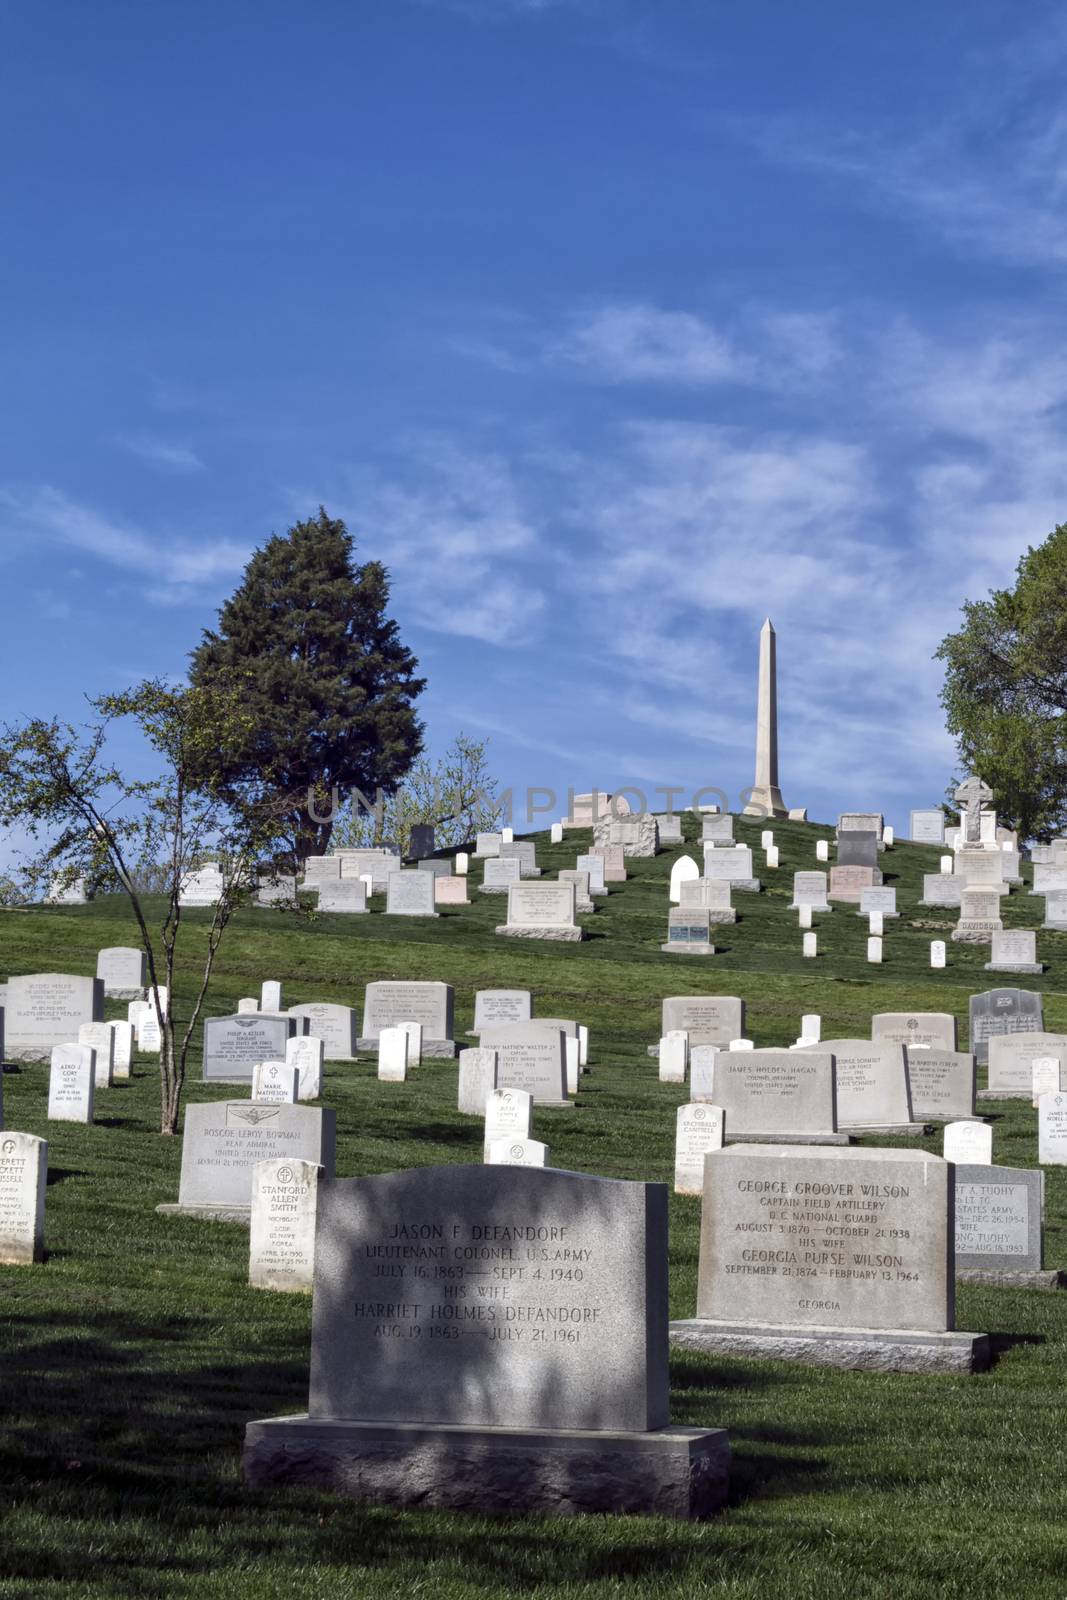 Tombstones at the Arlington National Cemetery in Virginia, USA